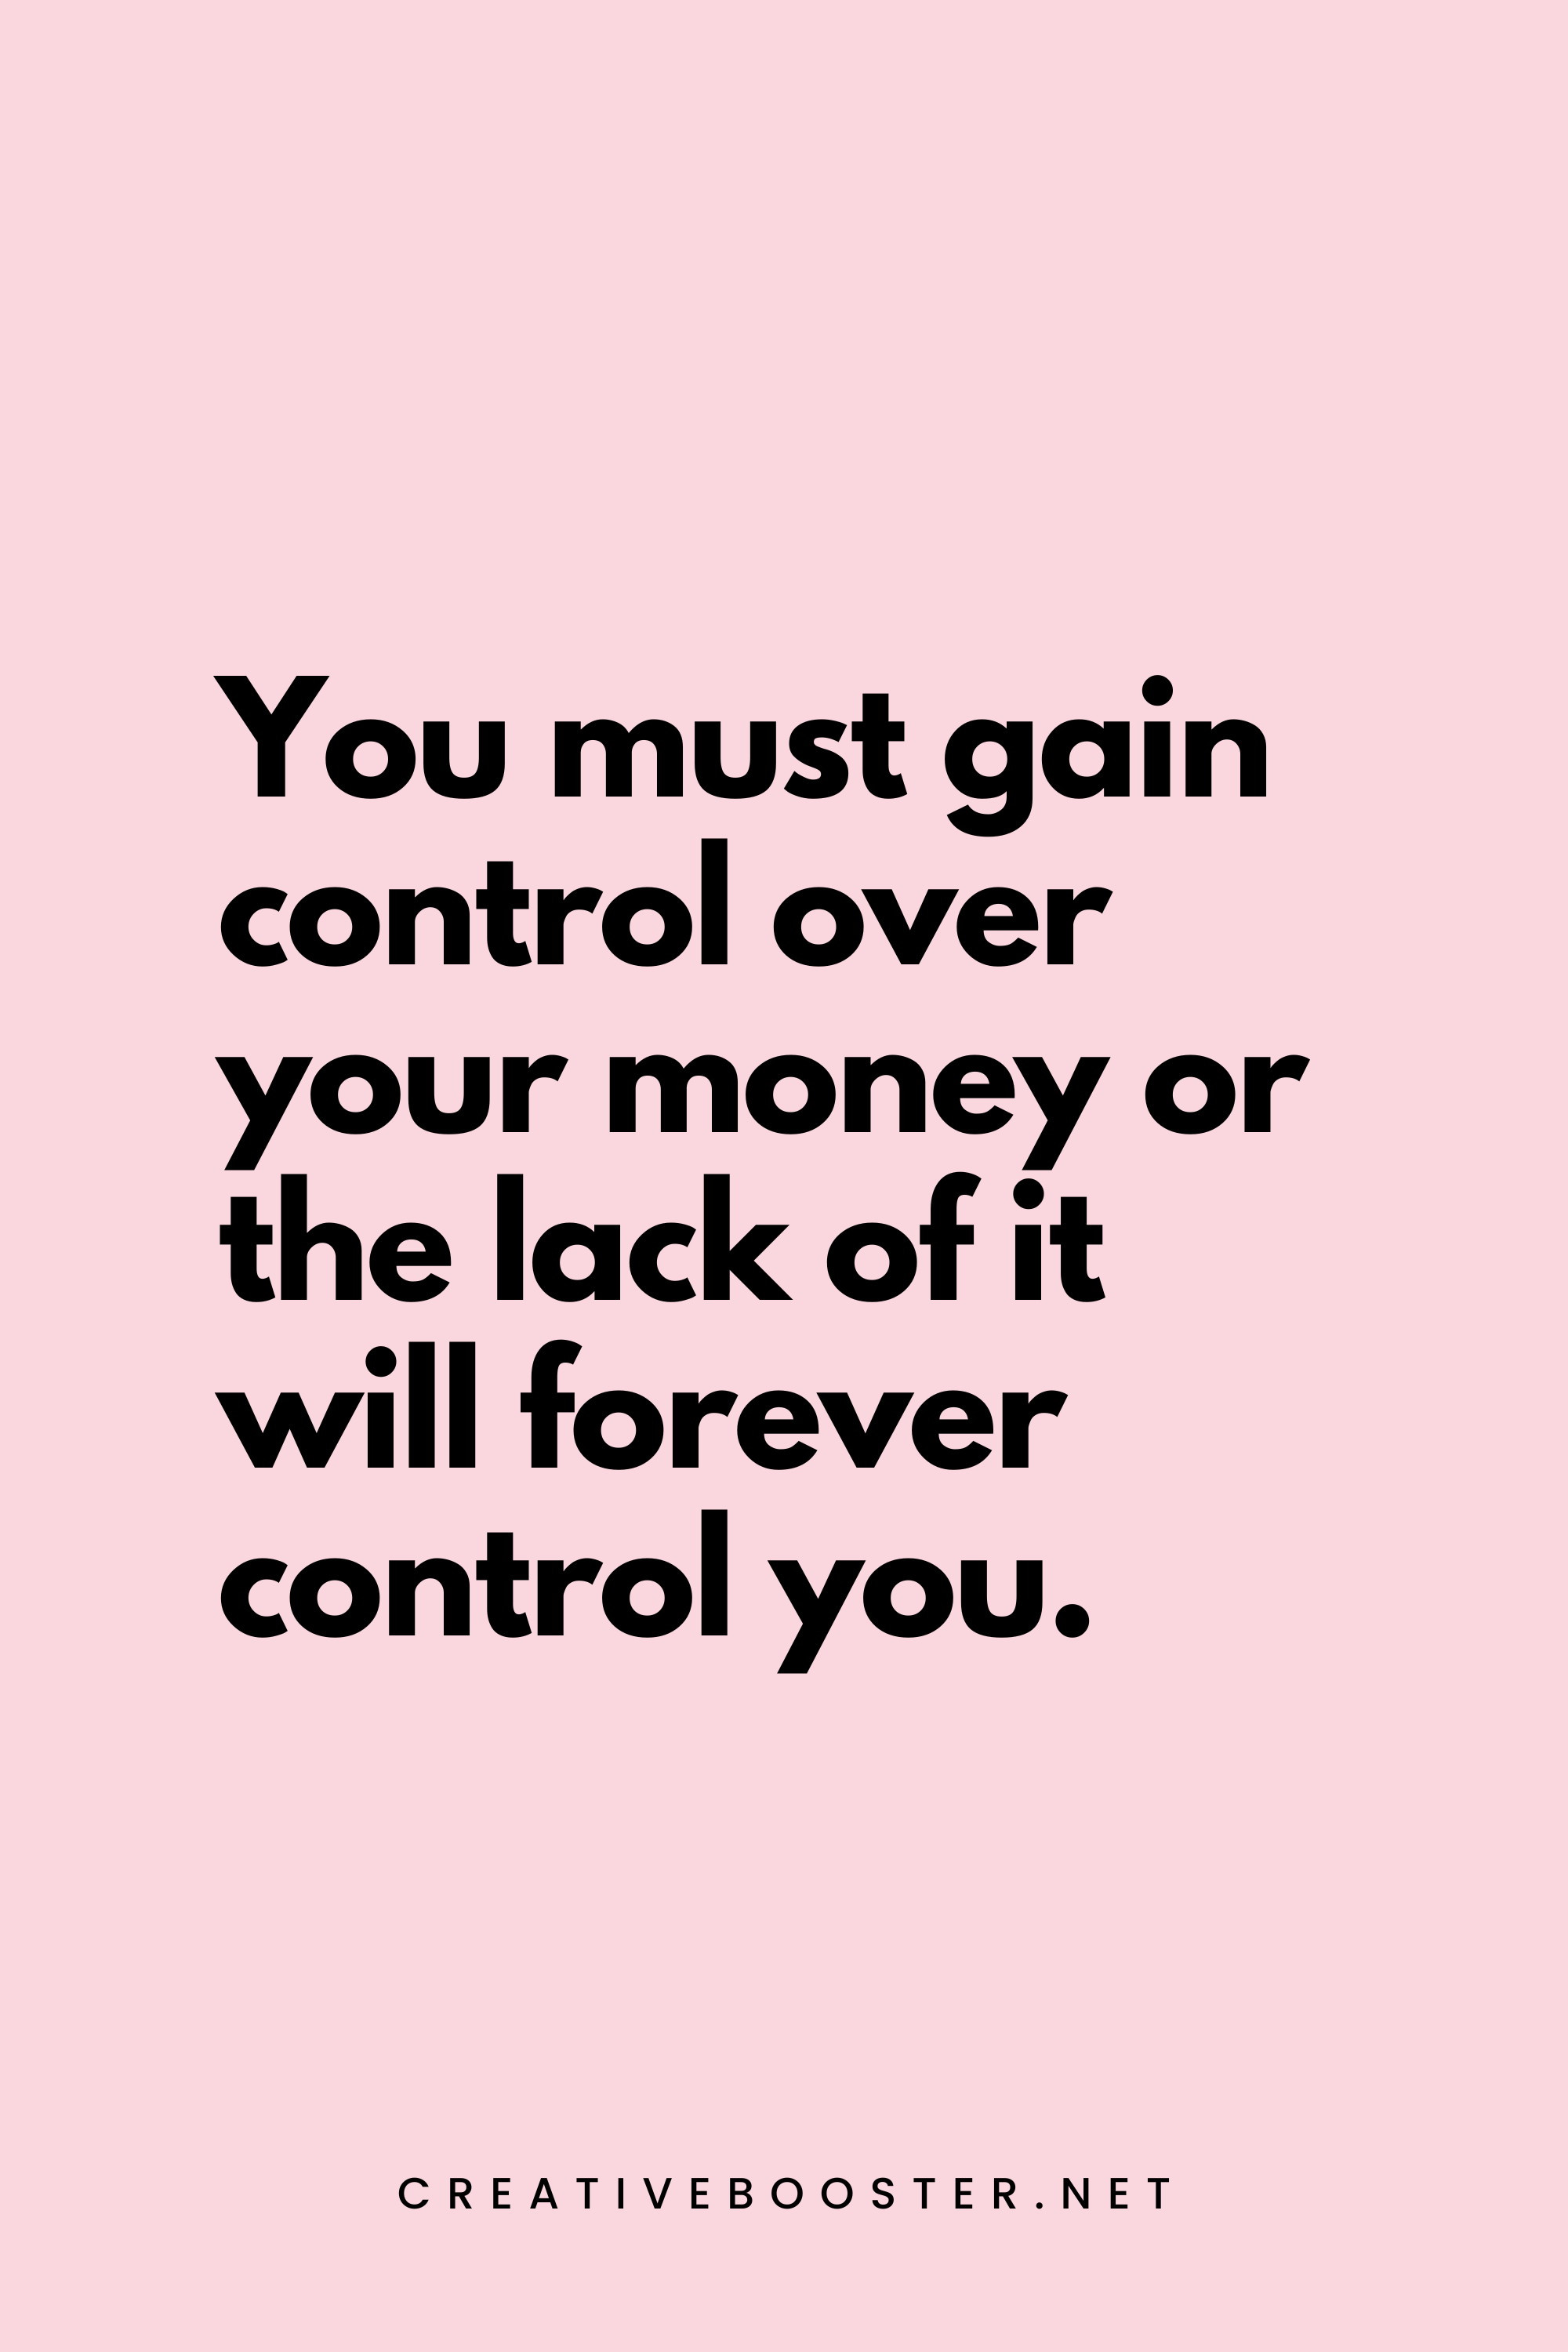 5. You must gain control over your money or the lack of it will forever control you. - Dave Ramsey - 1. Popular Financial Freedom Quotes